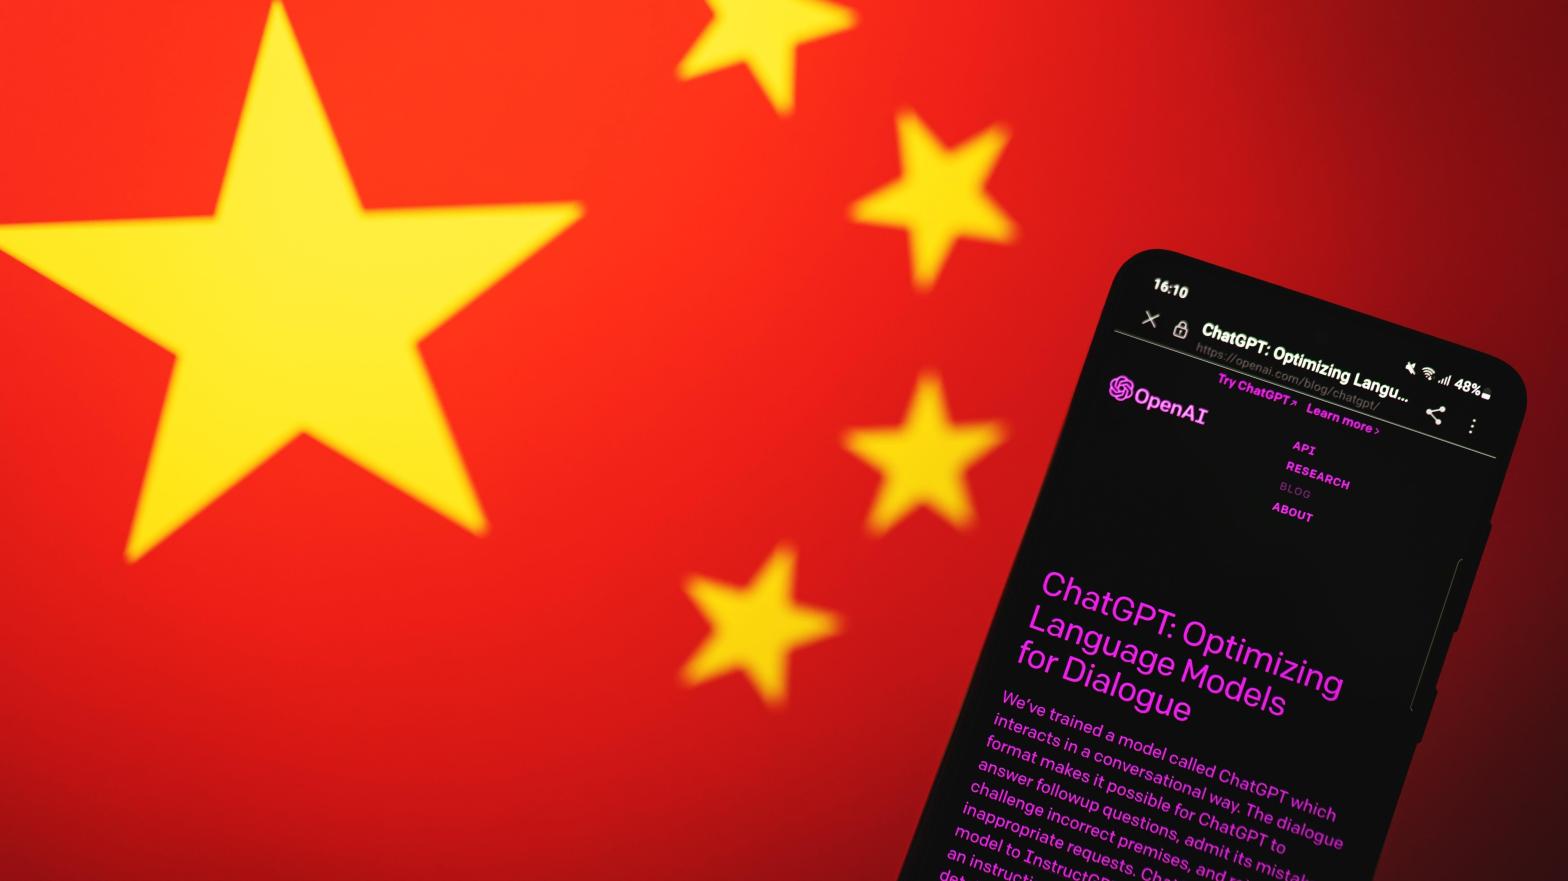 The Chinese government has officially banned OpenAI's ChatGPT while promoting other companies trying to create competing models that adhere to the CCP's censorship policies. (Image: salarko, Shutterstock)